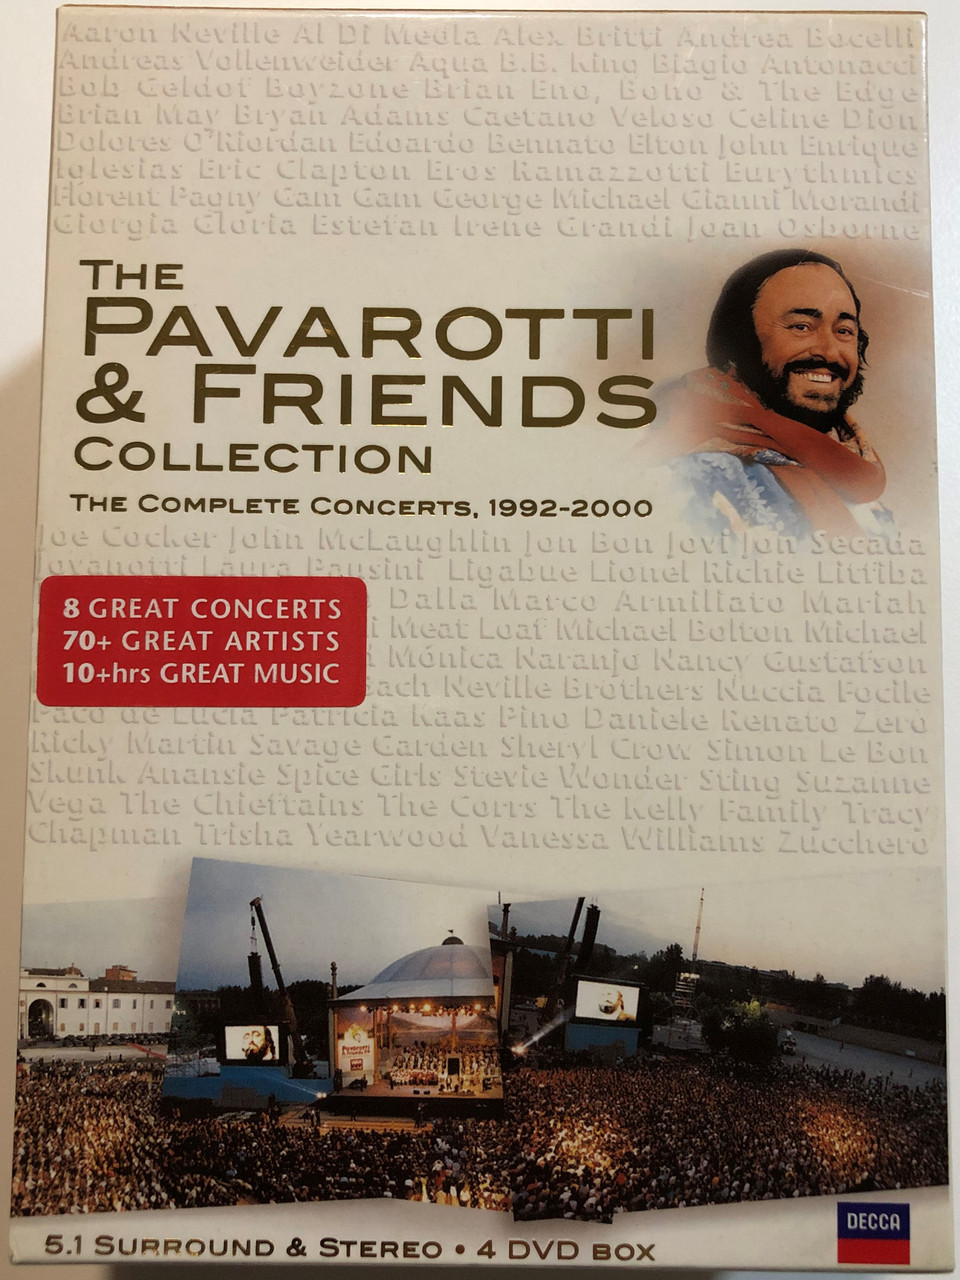 The Pavarotti & Friends Collection 4 DVD Box The Complete Concerts  1992-2000 / 8 Great Concerts - 70+ great artists / Decca - bibleinmylanguage